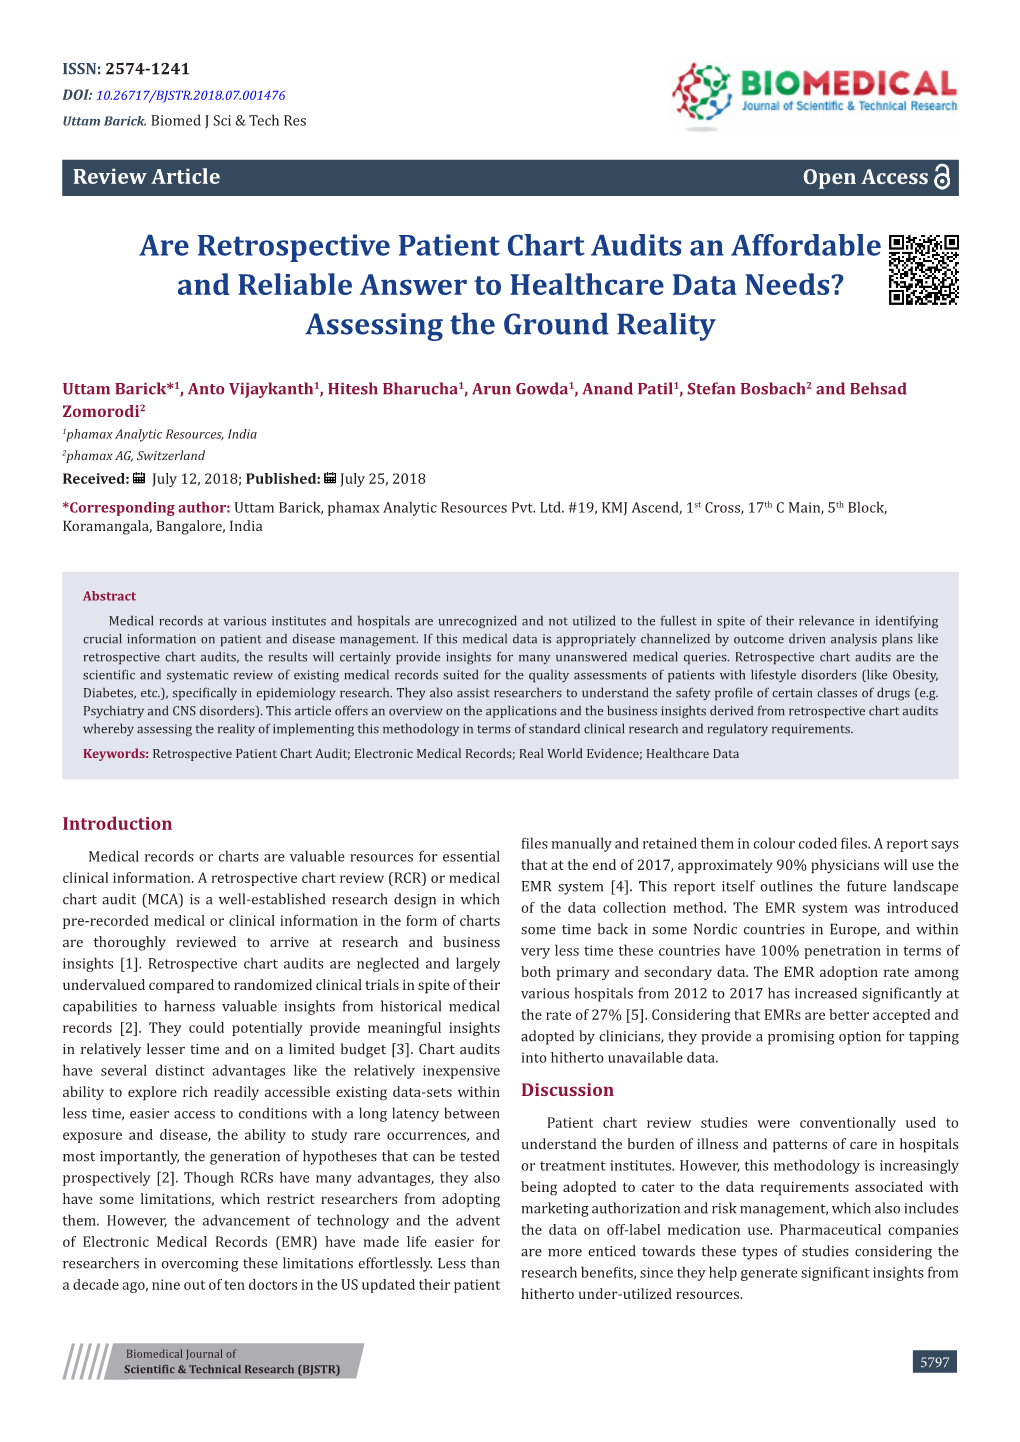 Are Retrospective Patient Chart Audits an Affordable and Reliable Answer to Healthcare Data Needs? Assessing the Ground Reality